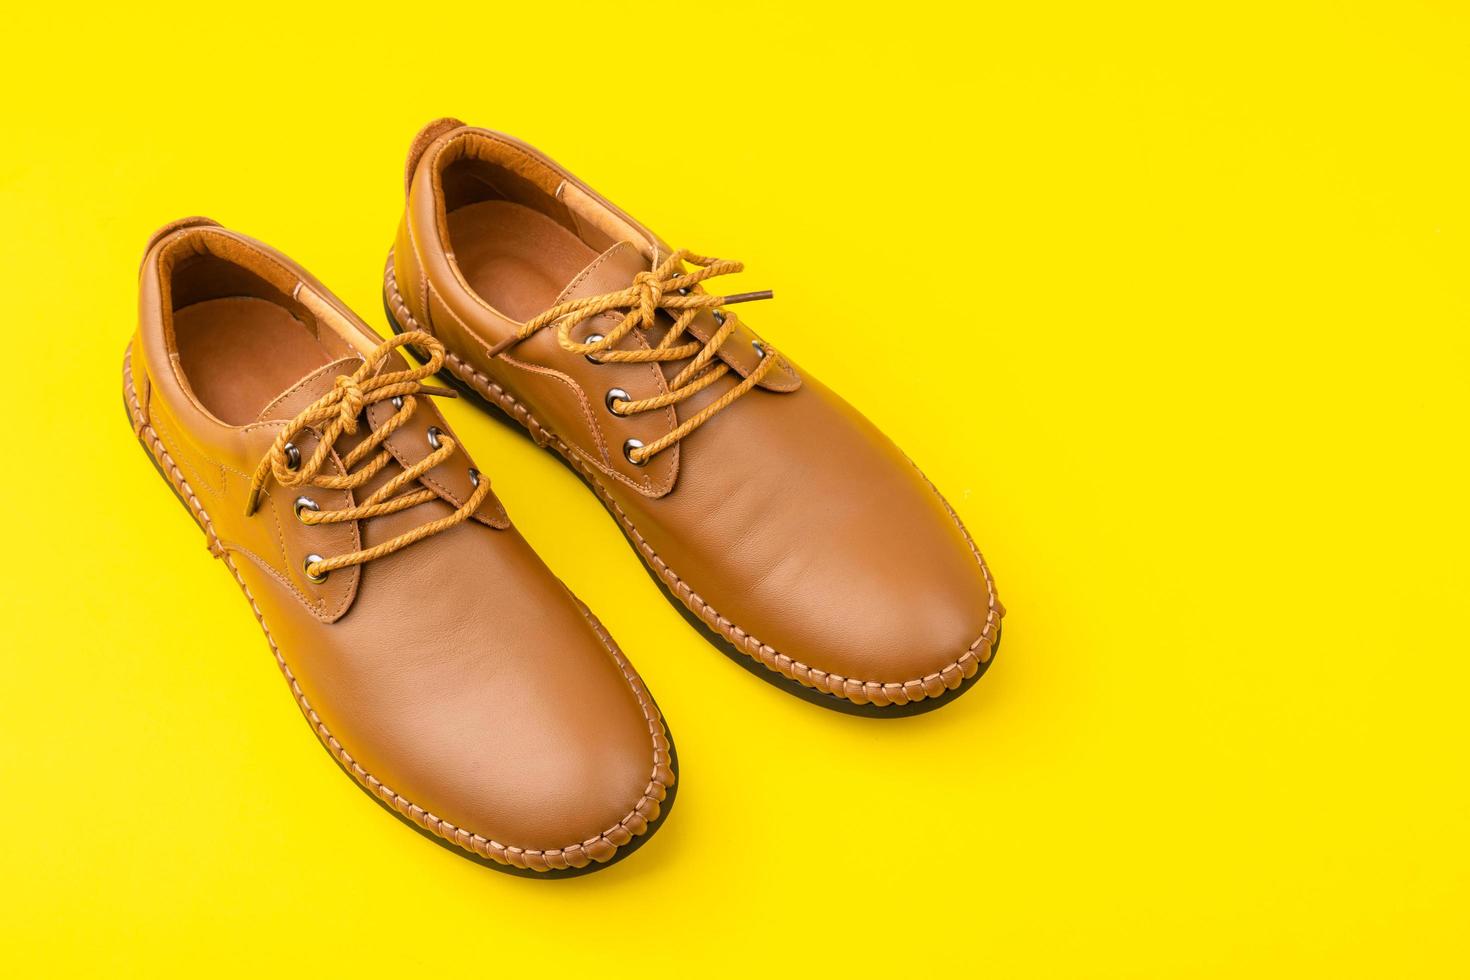 New brown men leather shoes. Studio shot isolated on yellow photo